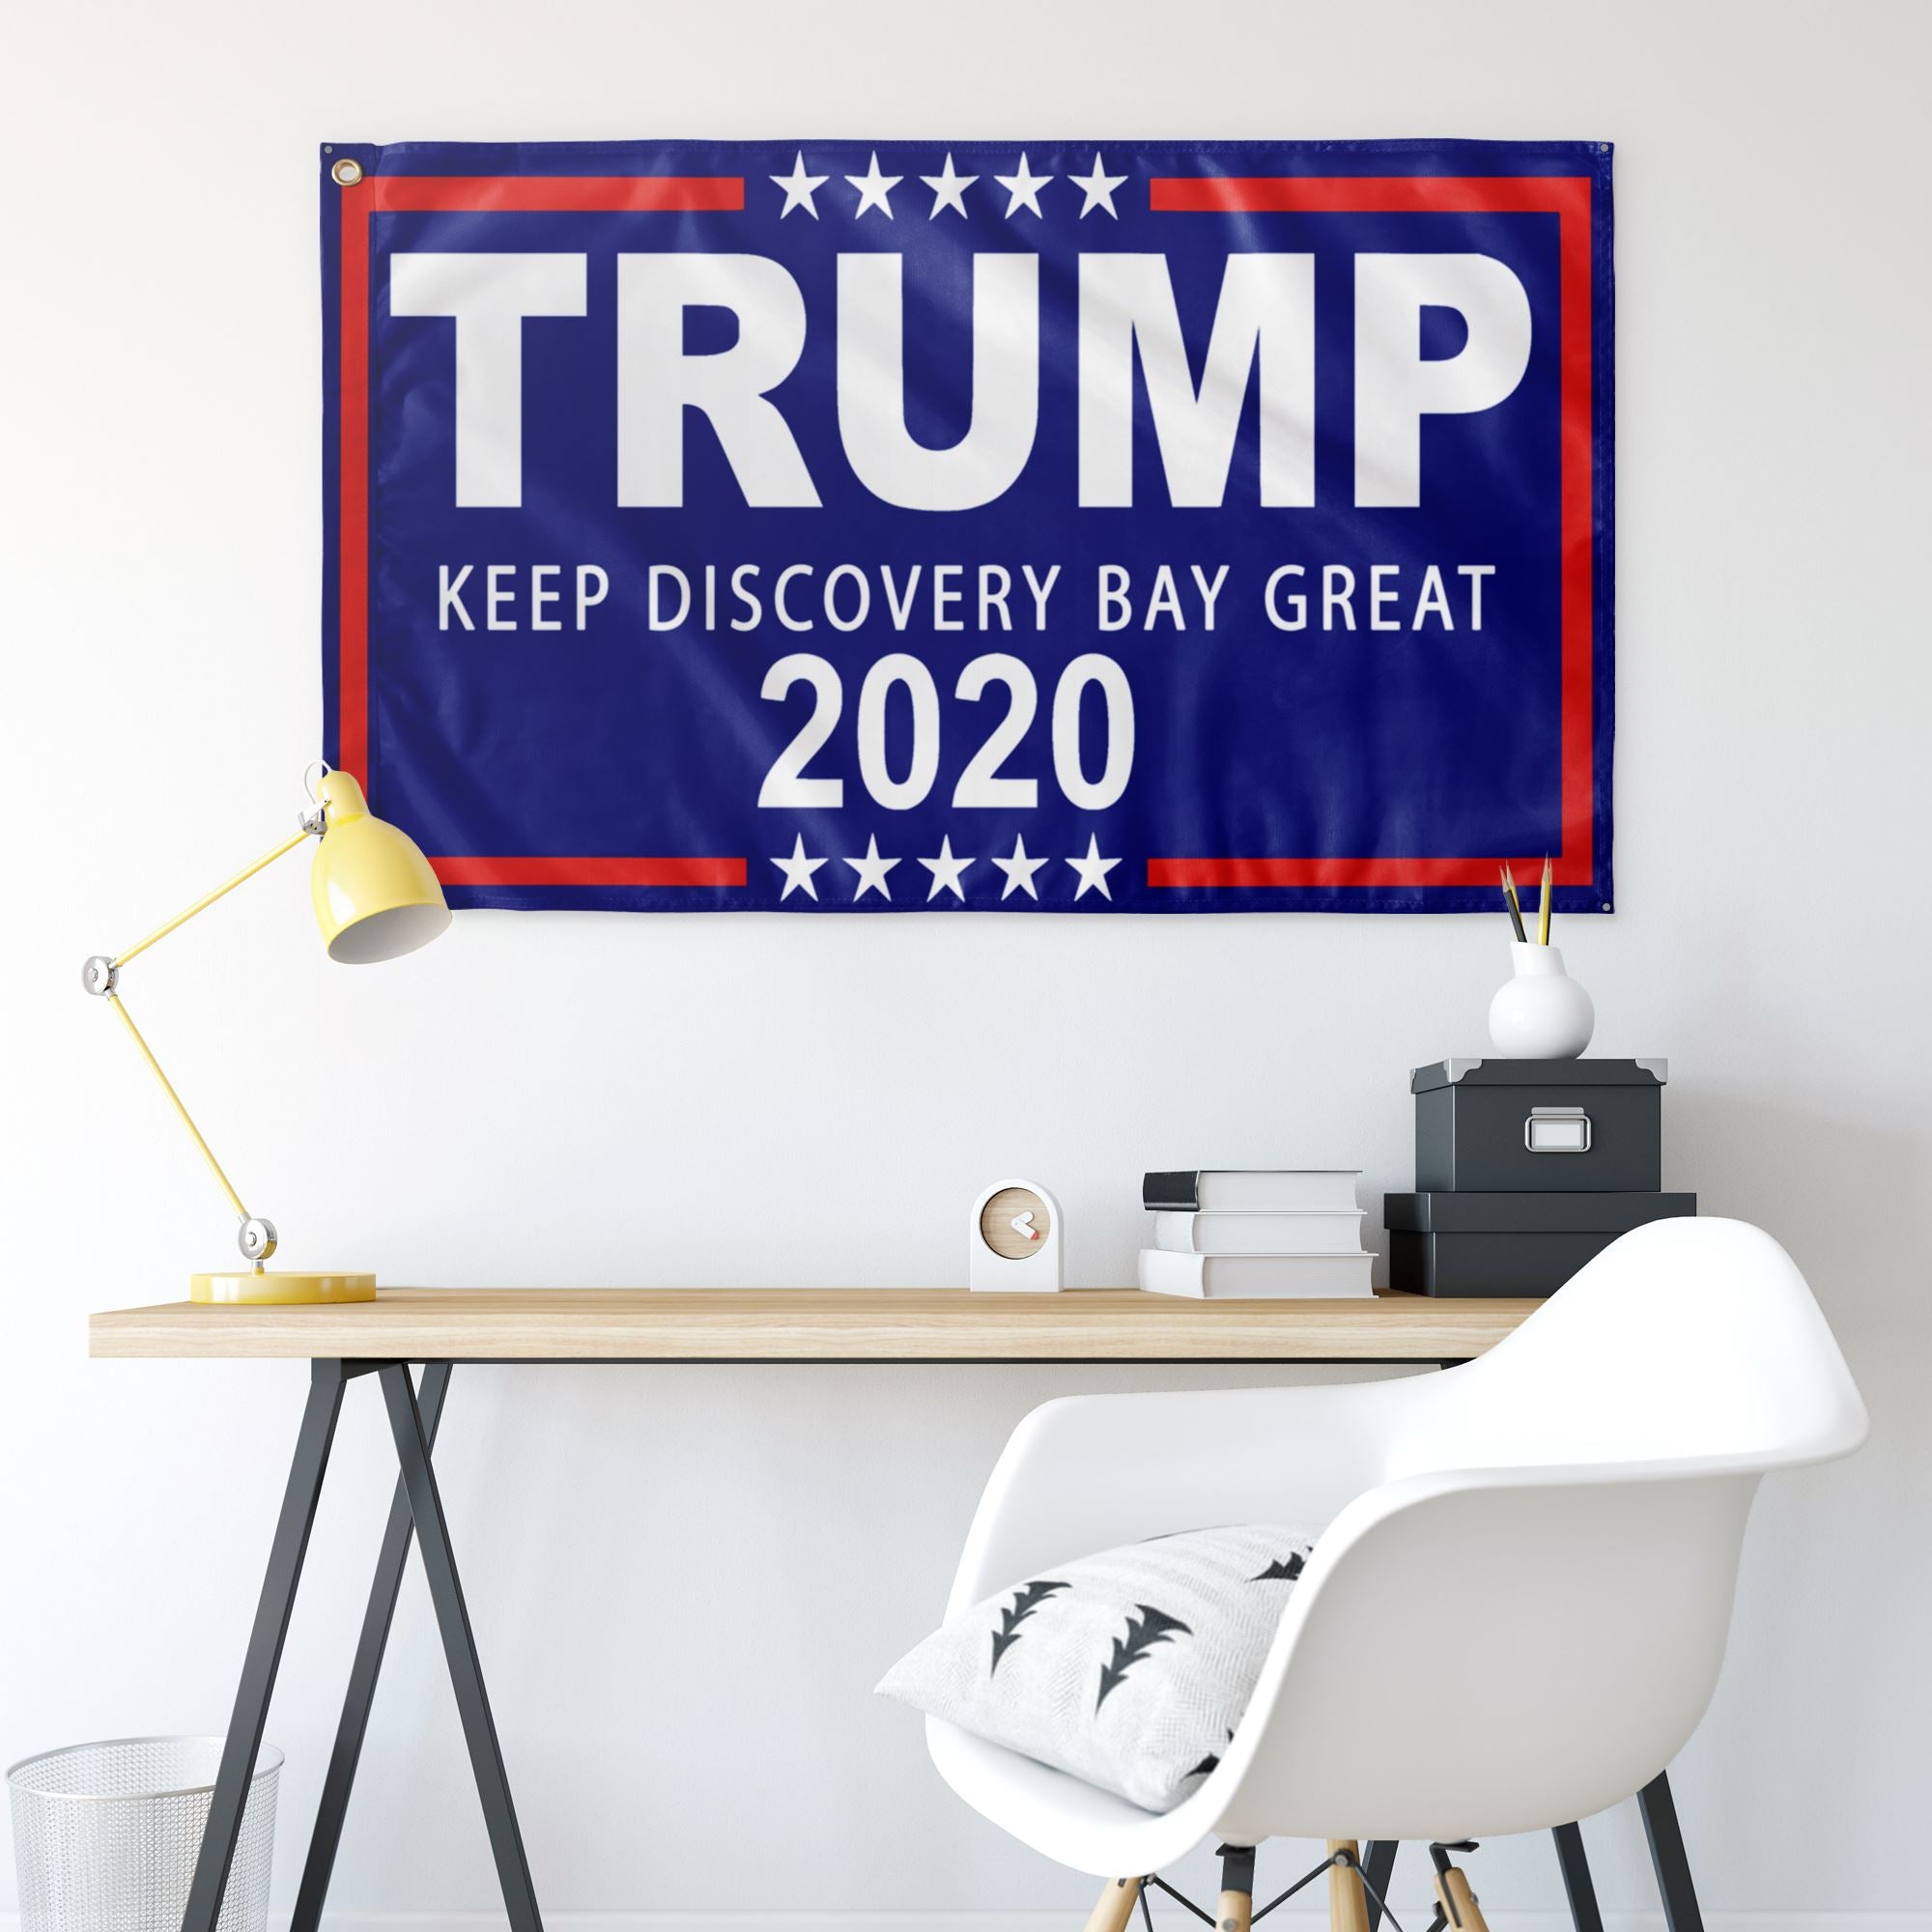 Trump Boat Flags - Keep Discovery Bay Great - Houseboat Kings